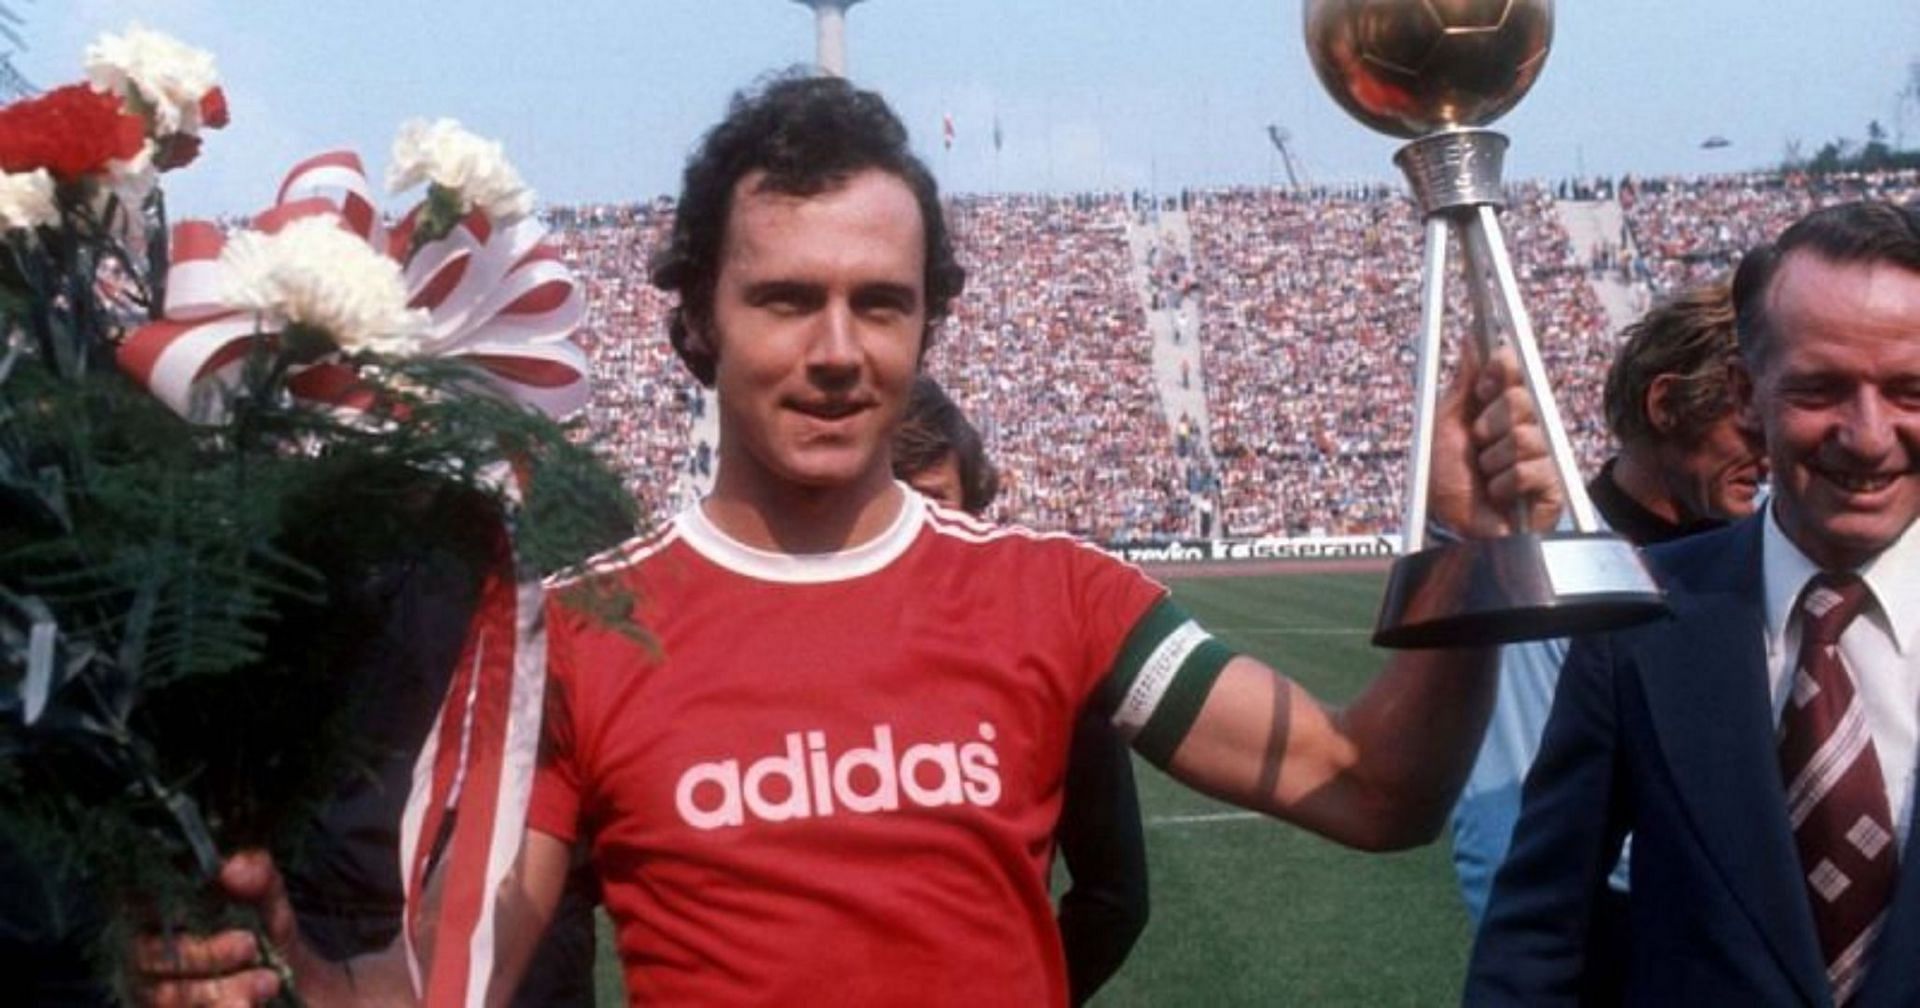 Beckenbauer is probably the greatest player to don the number 4 jersey.